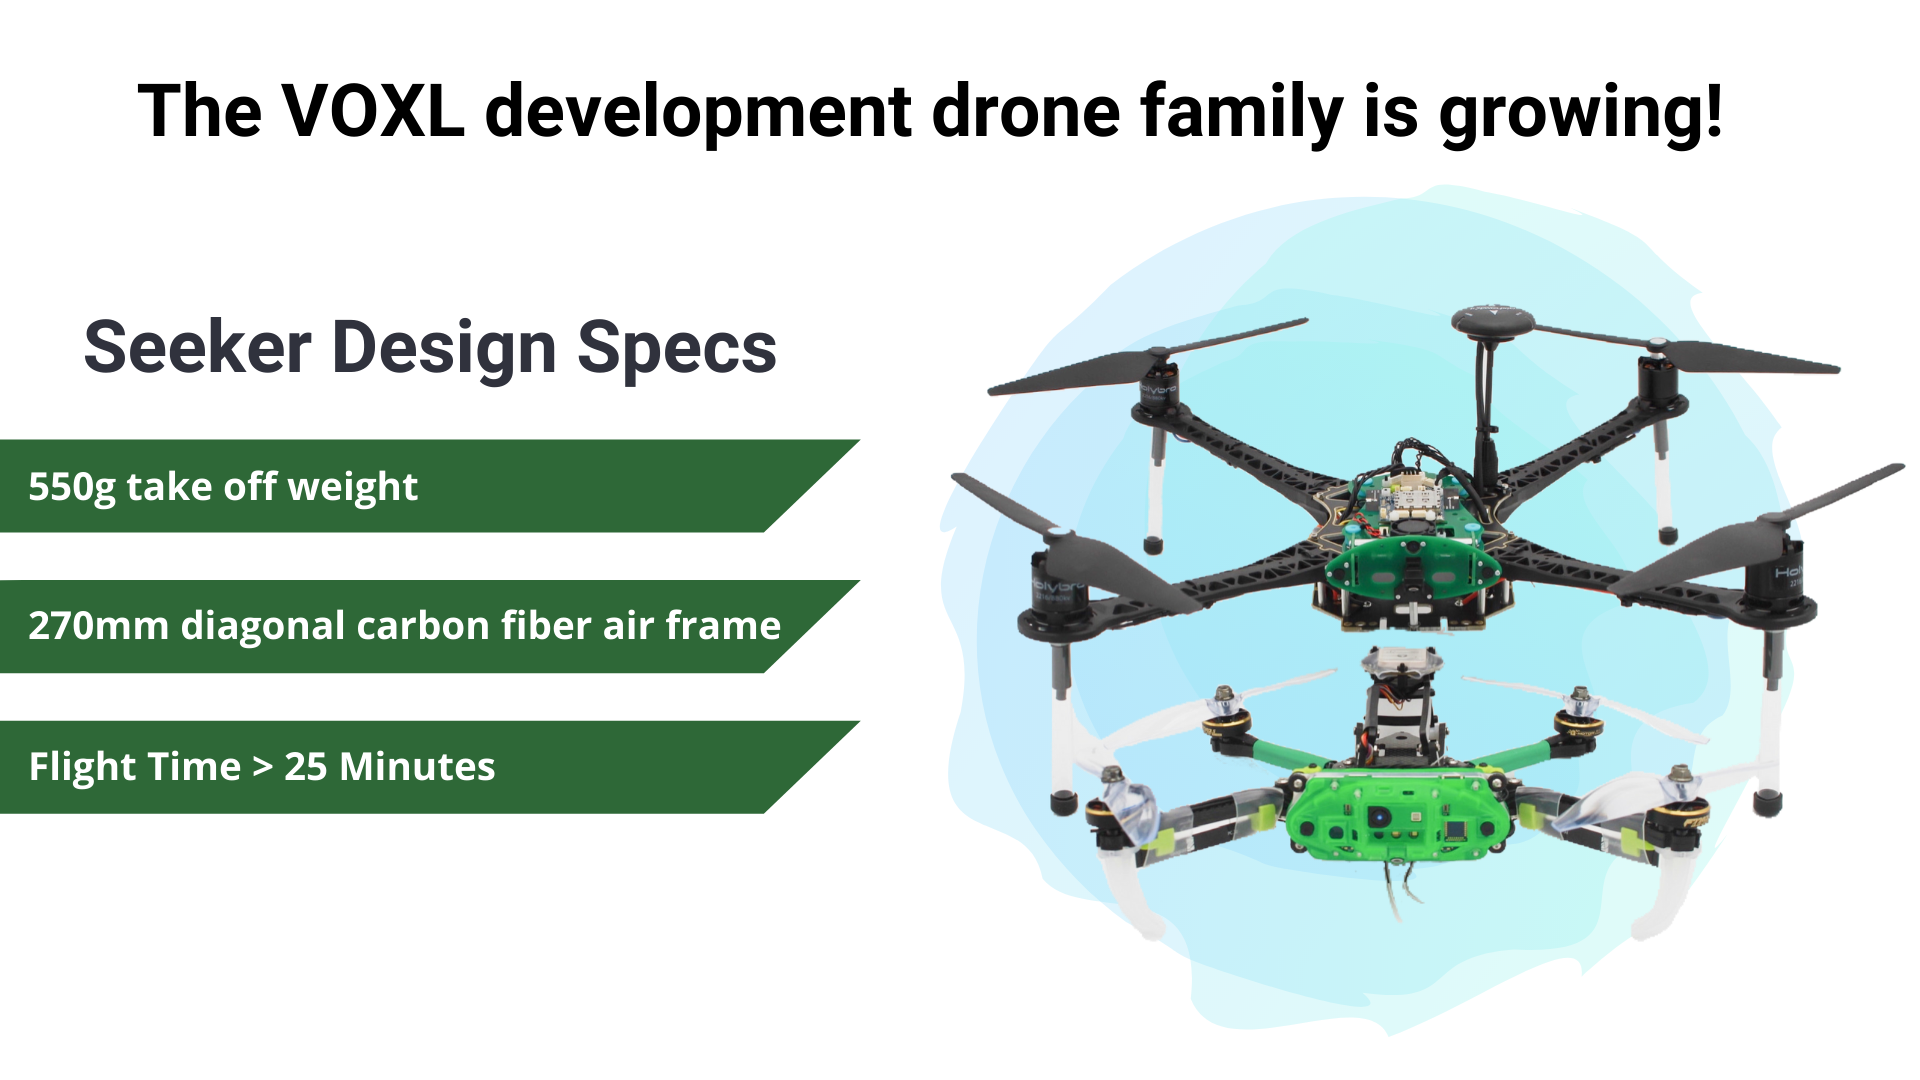 The VOXL development drone family is growing! Seeker design specs - 550g take off weight - 270mm diagonal carbon fiber air frame - Flight time > 25 minutes